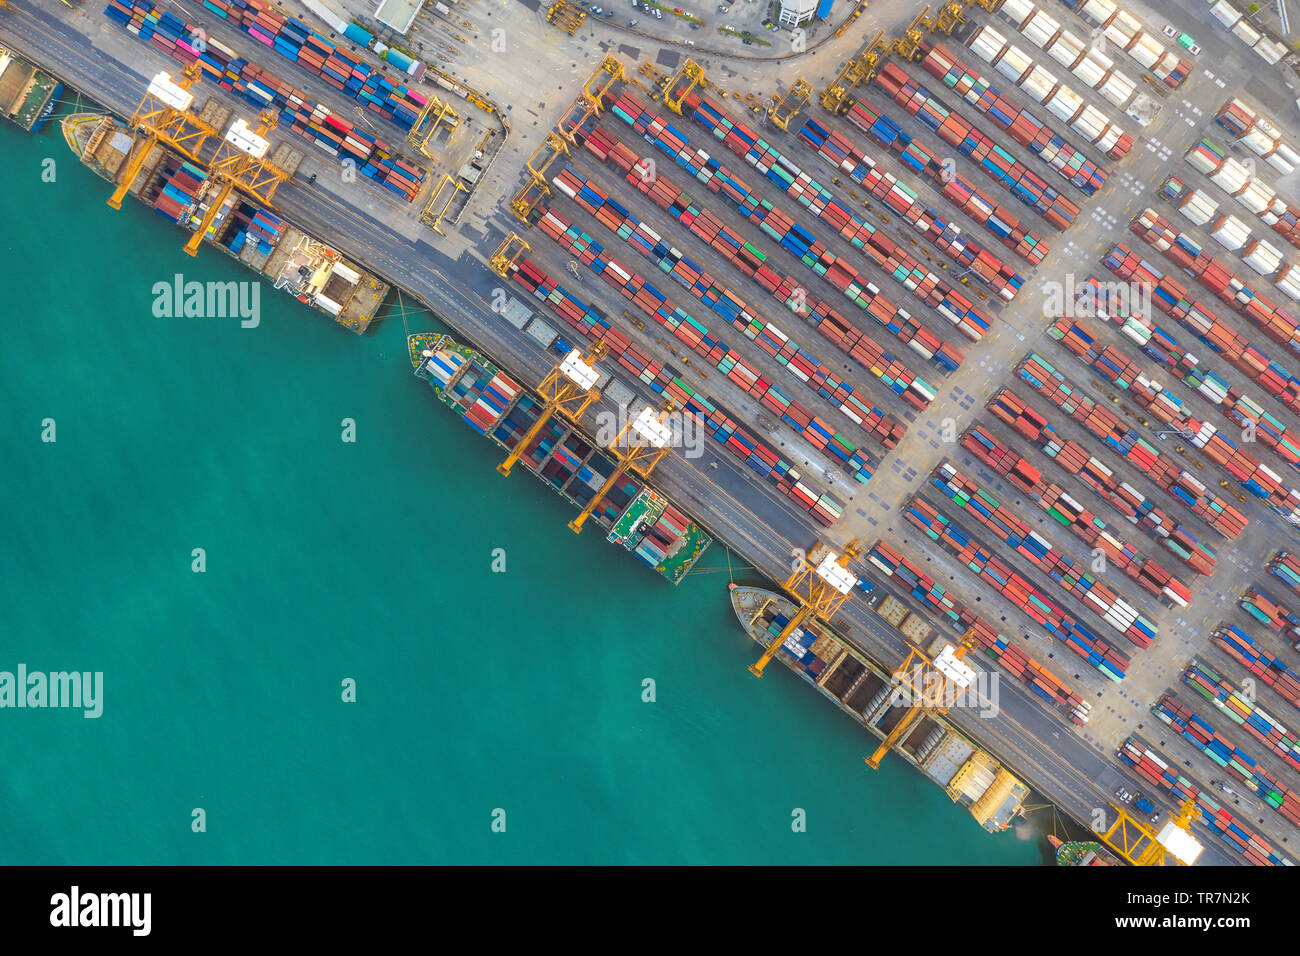 Container ship in export and import business and logistics. Shipping cargo to harbor by crane. Water transport International. Aerial view Stock Photo